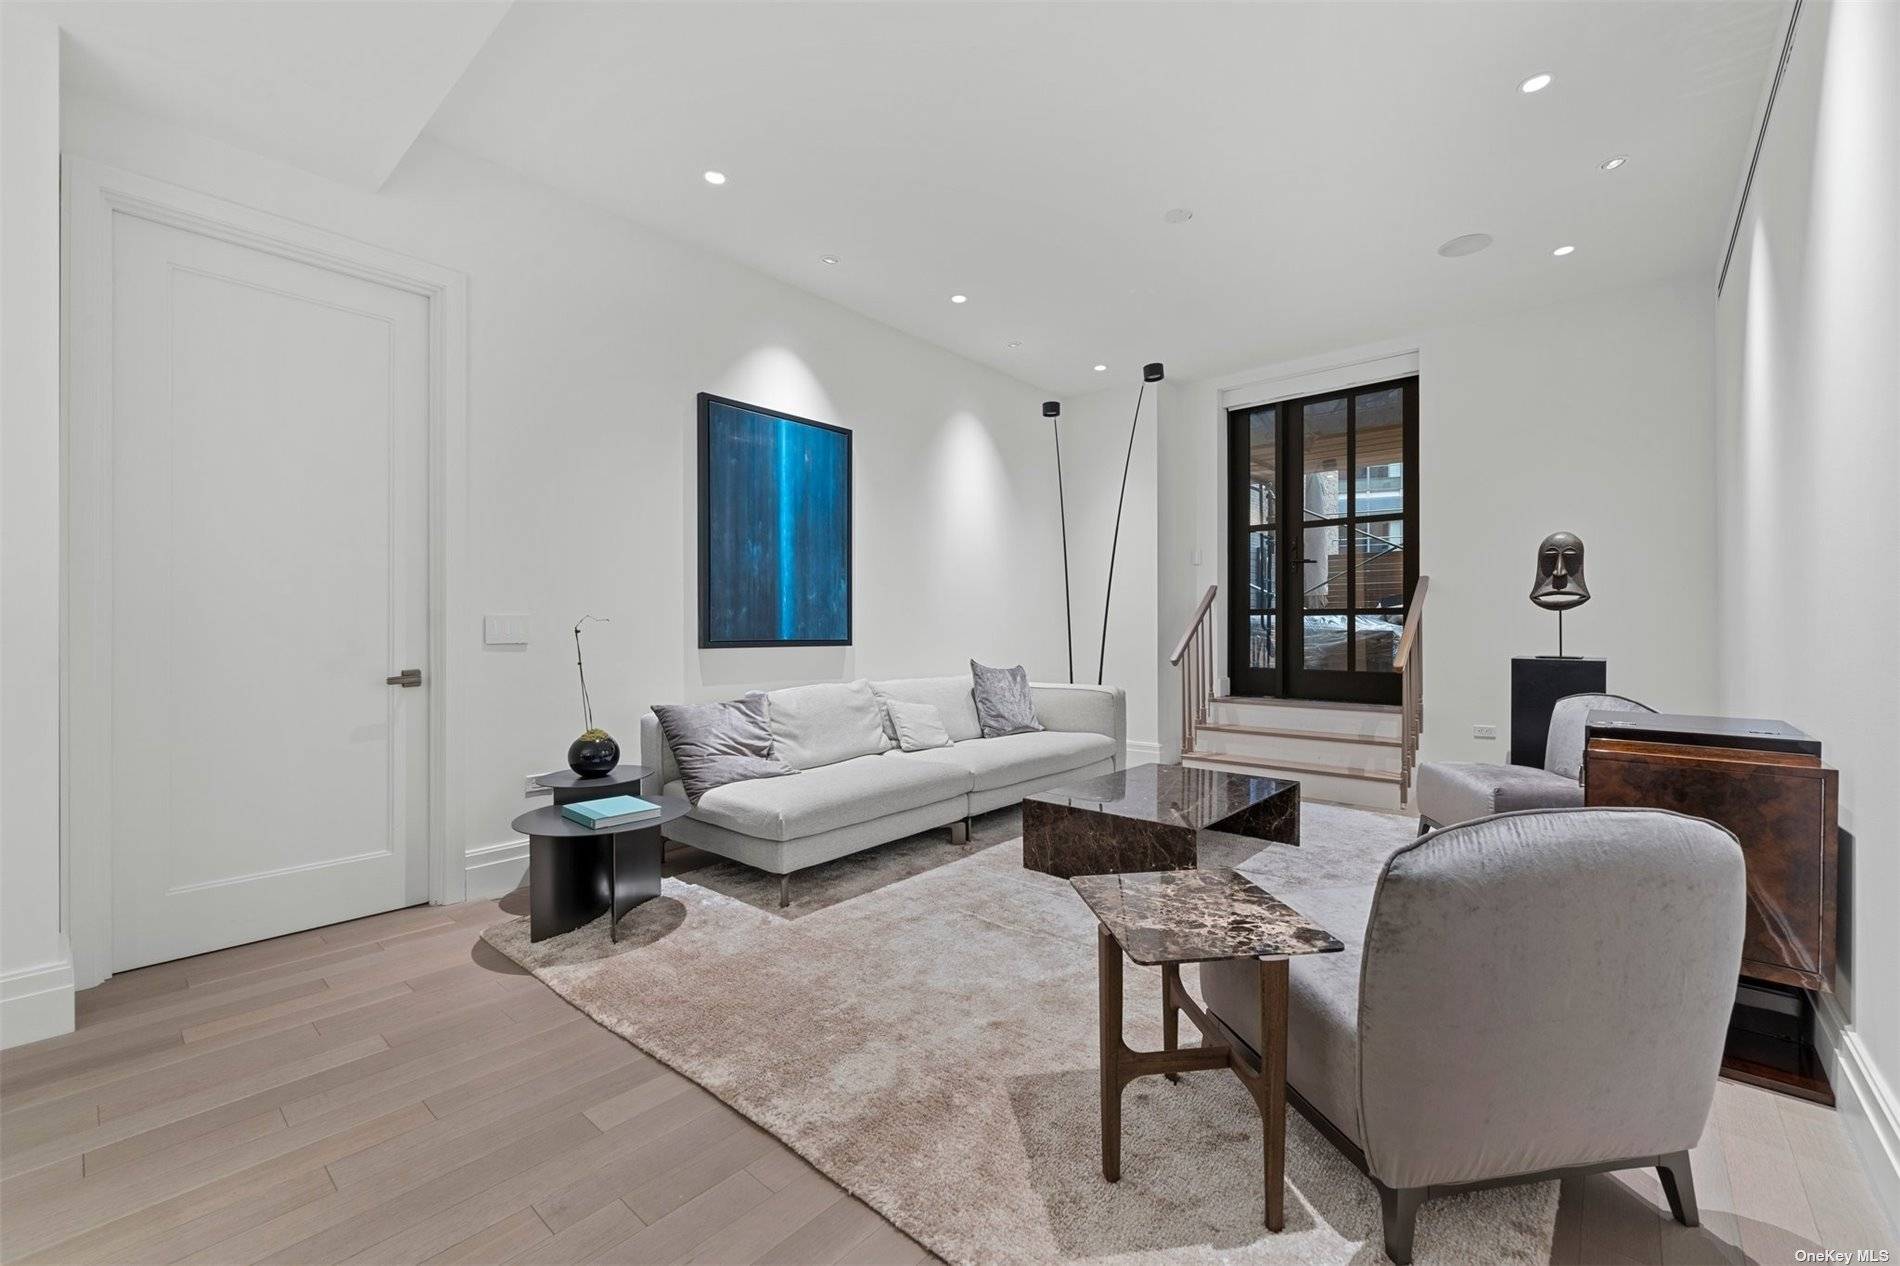 Welcome to 100 BARCLAY ST, beautifully crafted by famous architect Paul Walker.